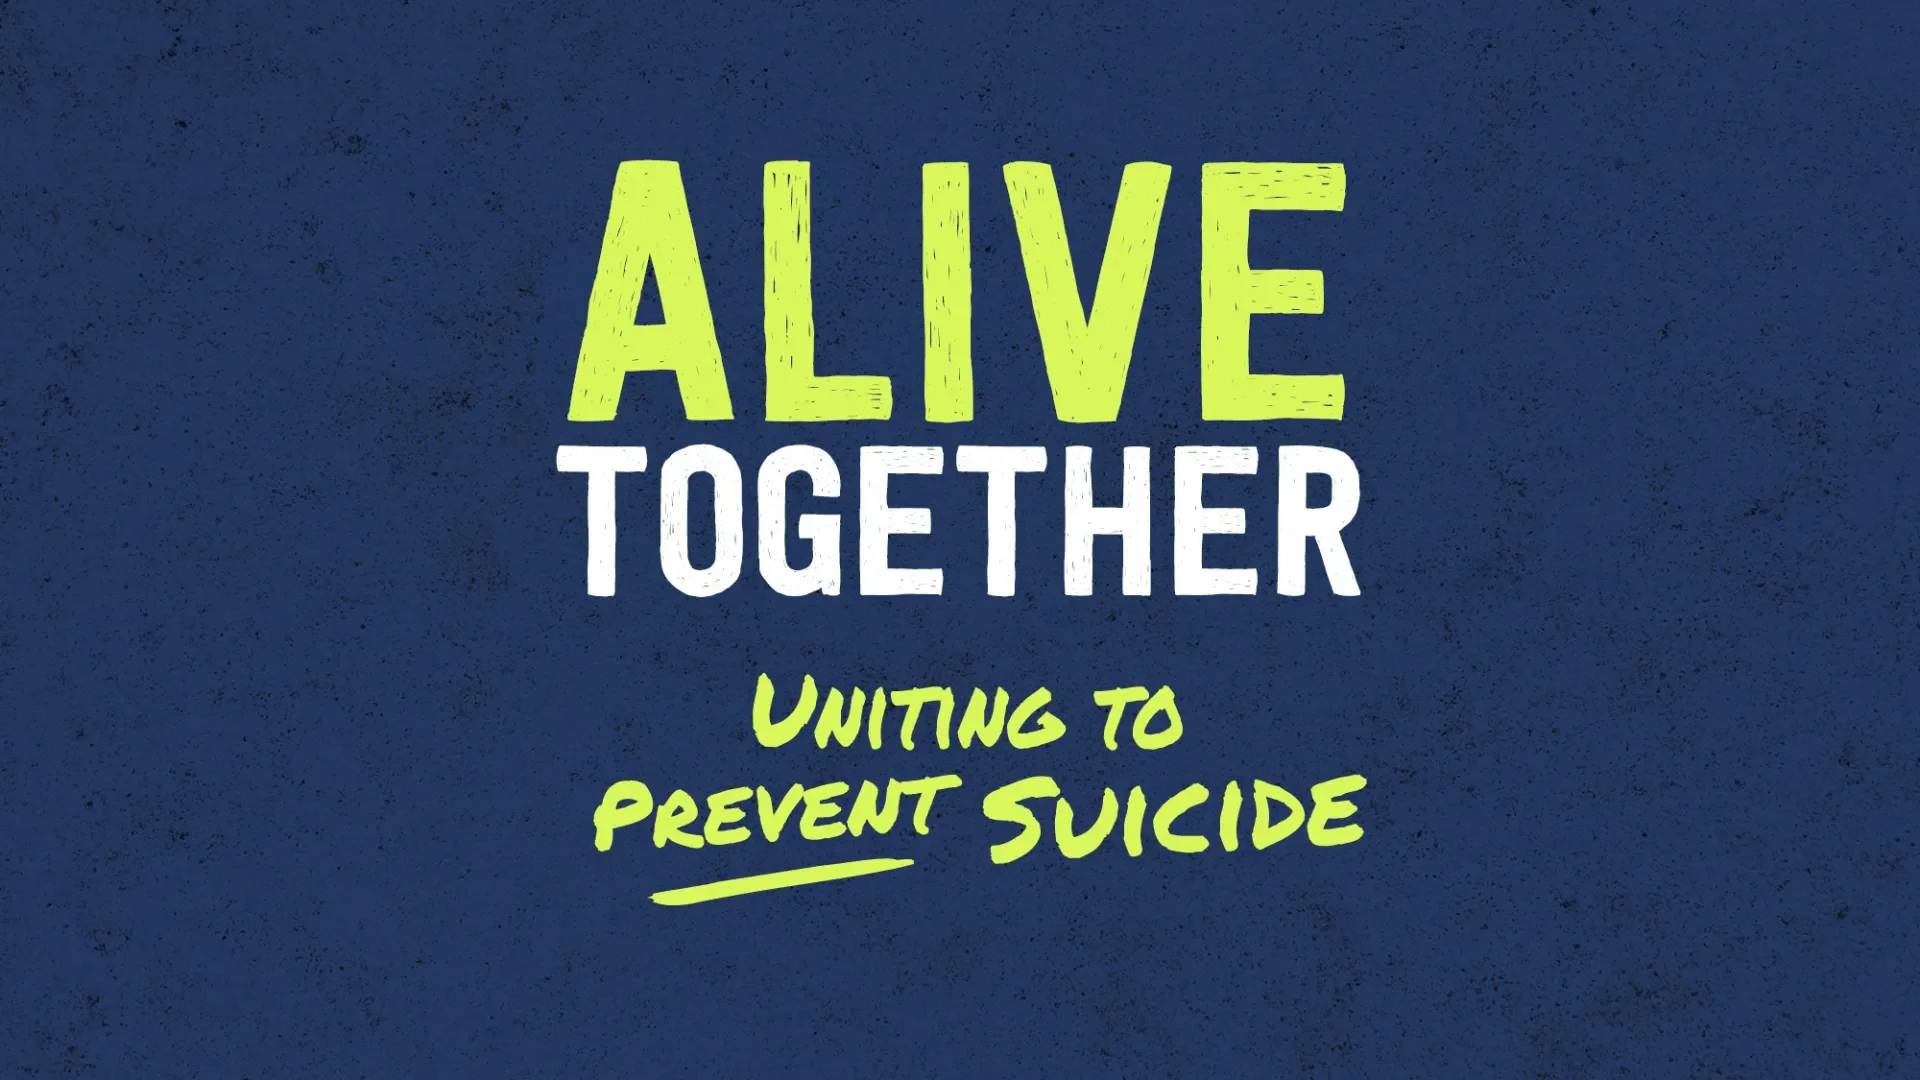 Alive Together: Uniting to Prevent Suicide